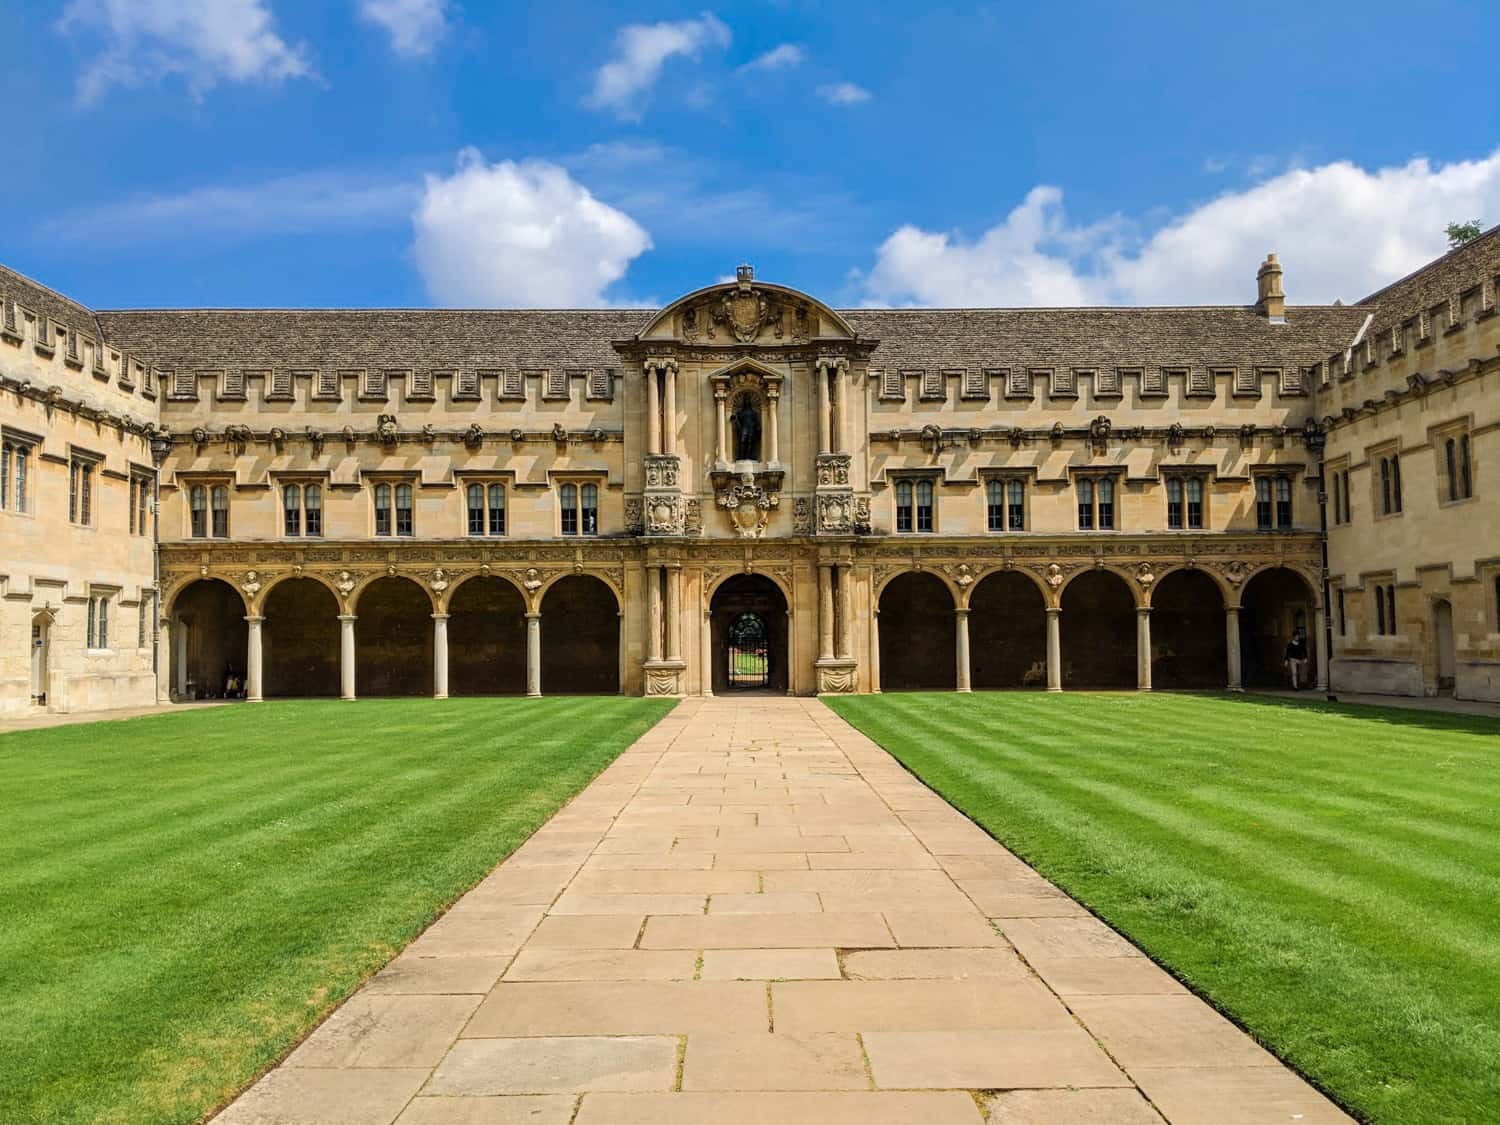 St Johns College in Oxford